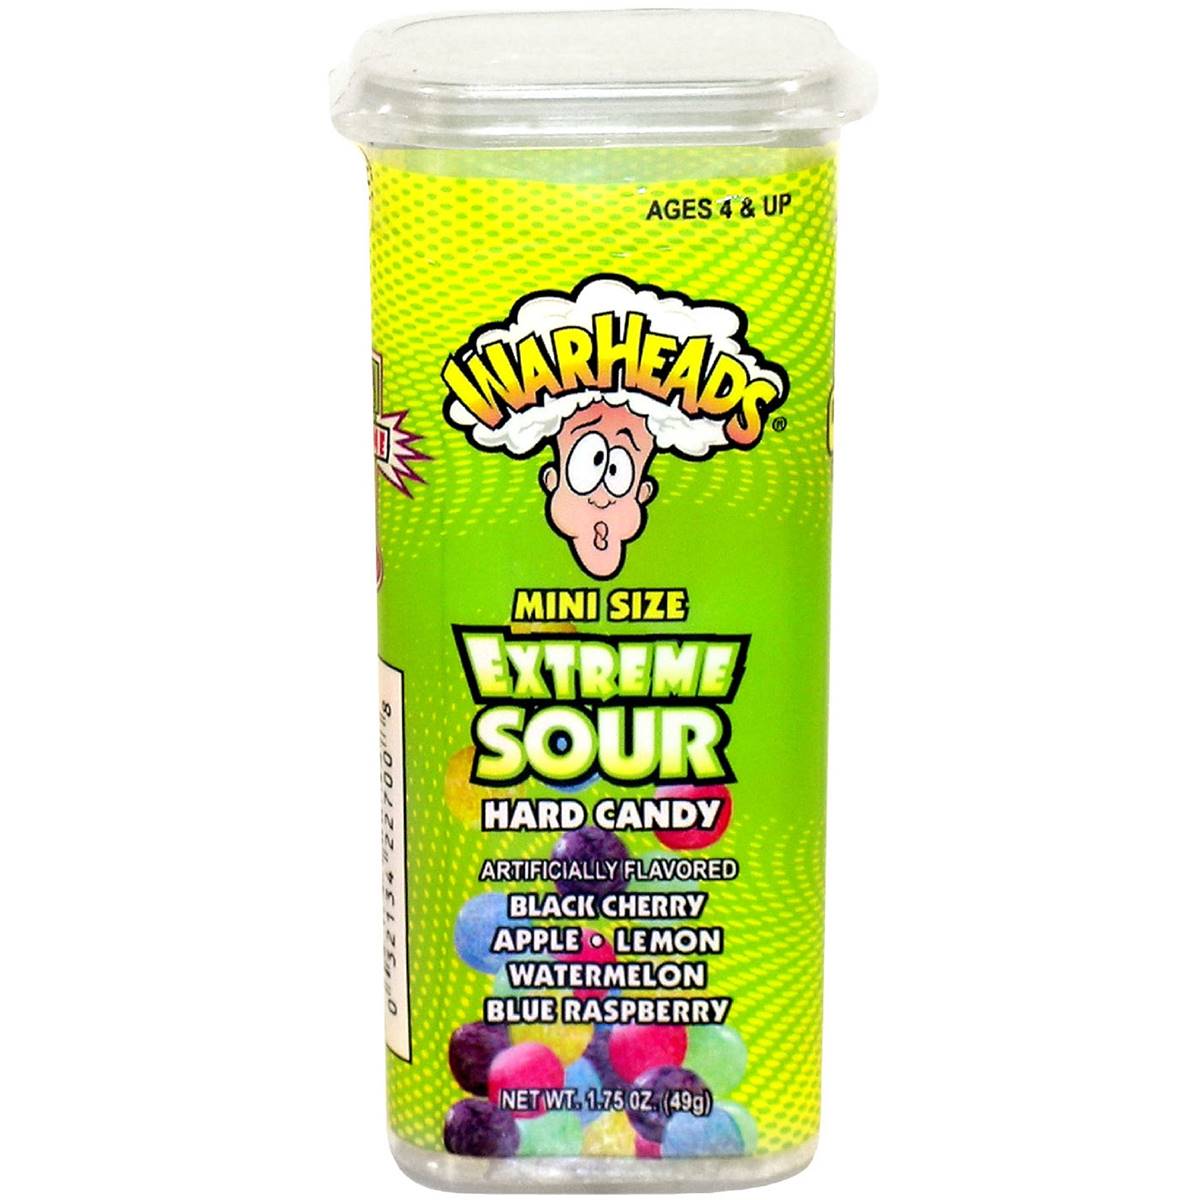 Warheads Extreme Sour Hard Candy Minis